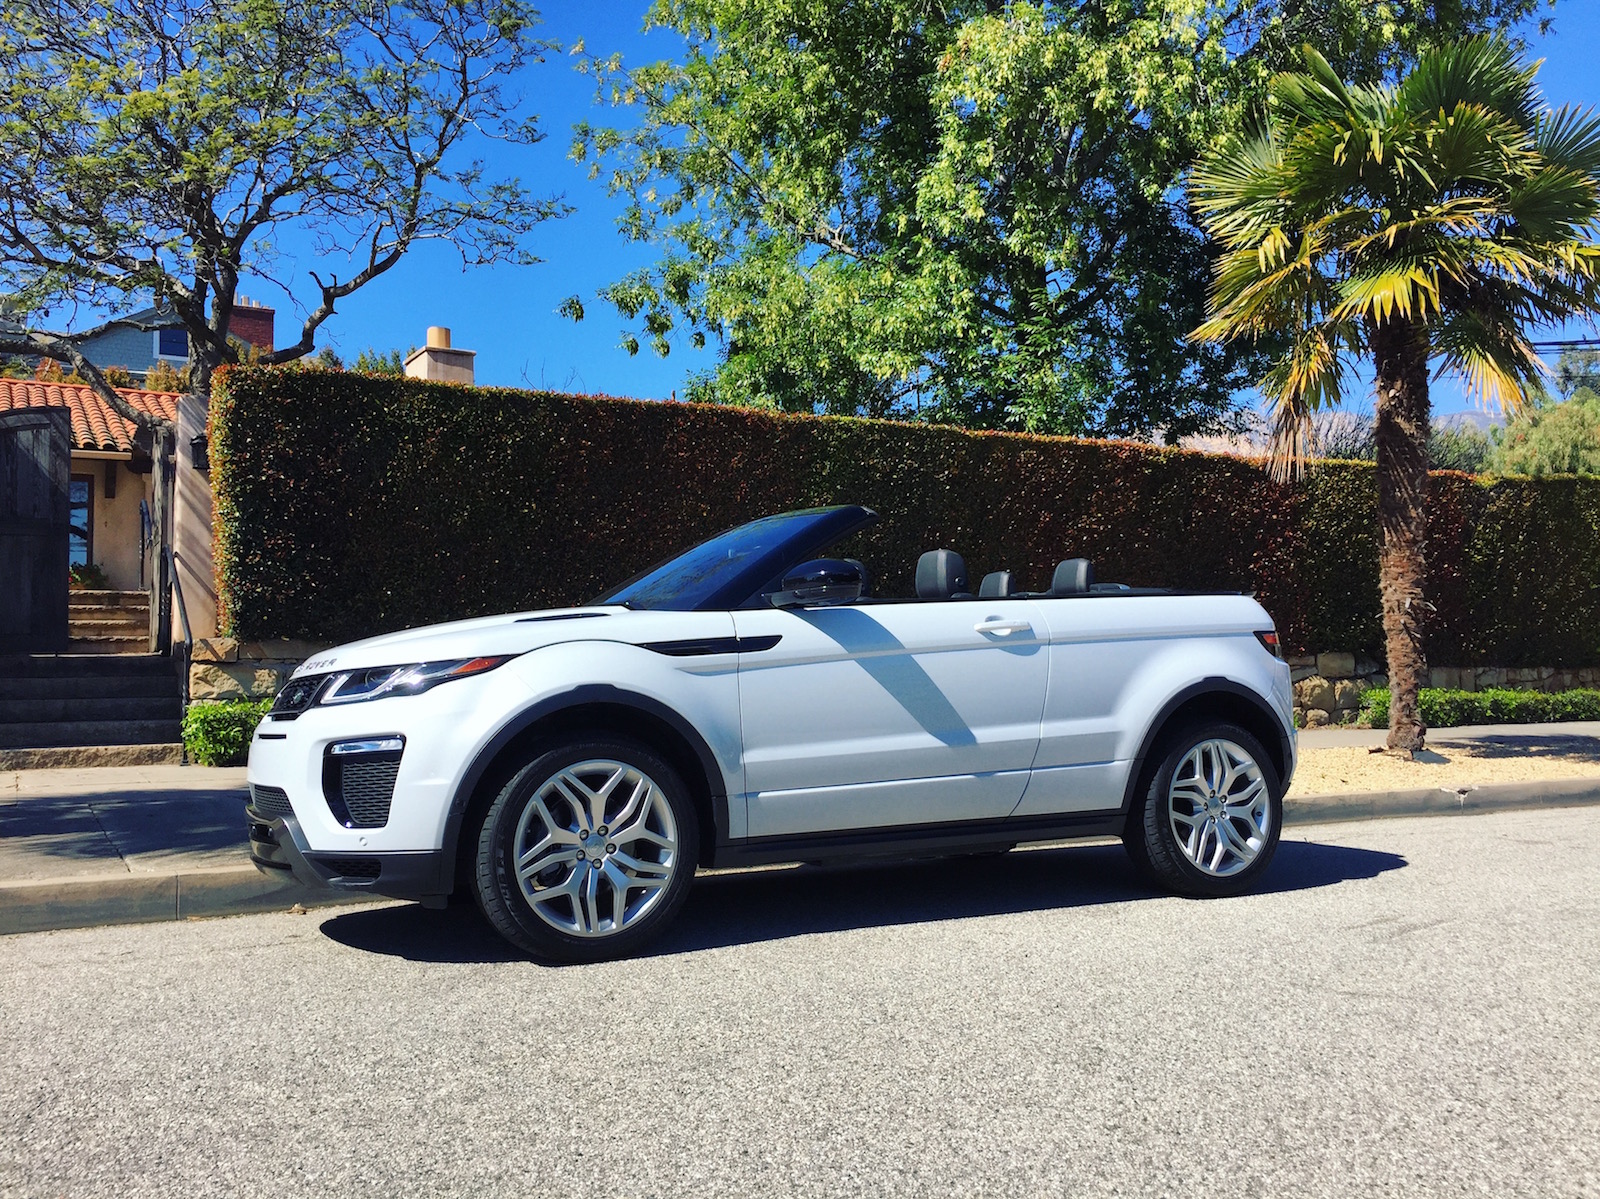 New Range Rover Evoque Convertible: Ask Us Anything